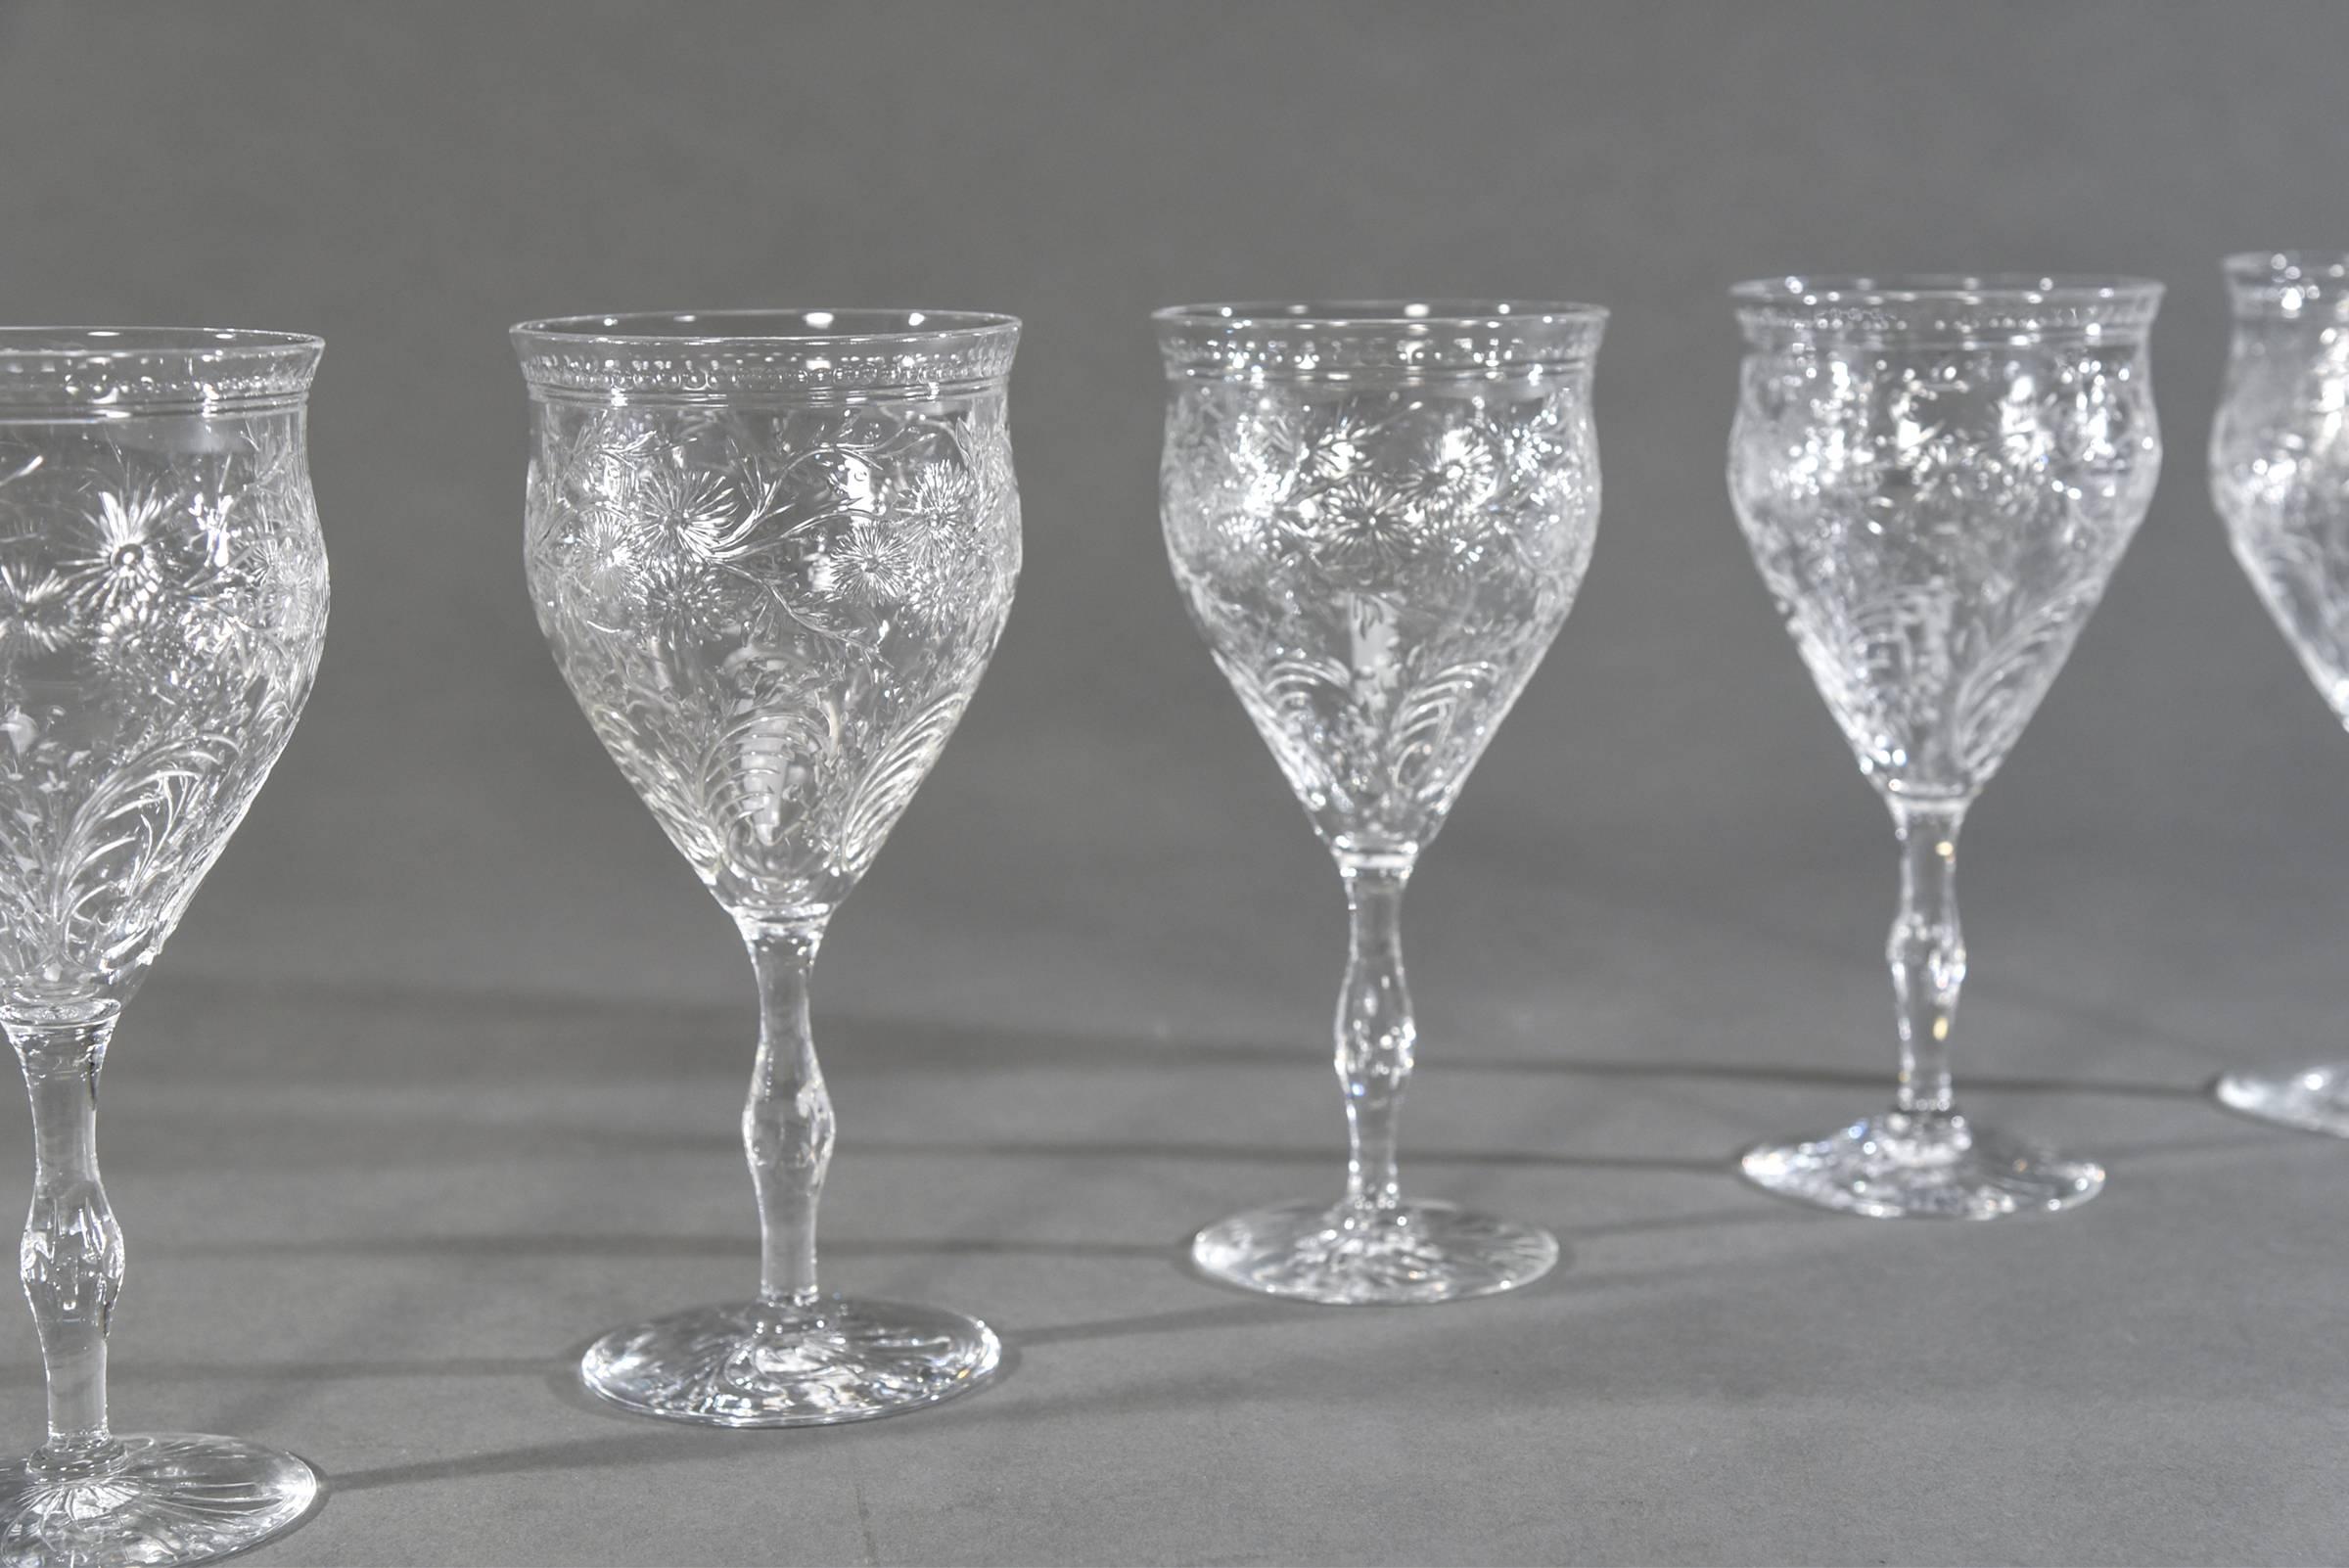 This set of 12 hand blown crystal goblets were made by Webb Corbett, England and are the perfect addition to your table setting. The nice large size makes these an excellent choice for use as a water goblet or wine goblet as they are large enough